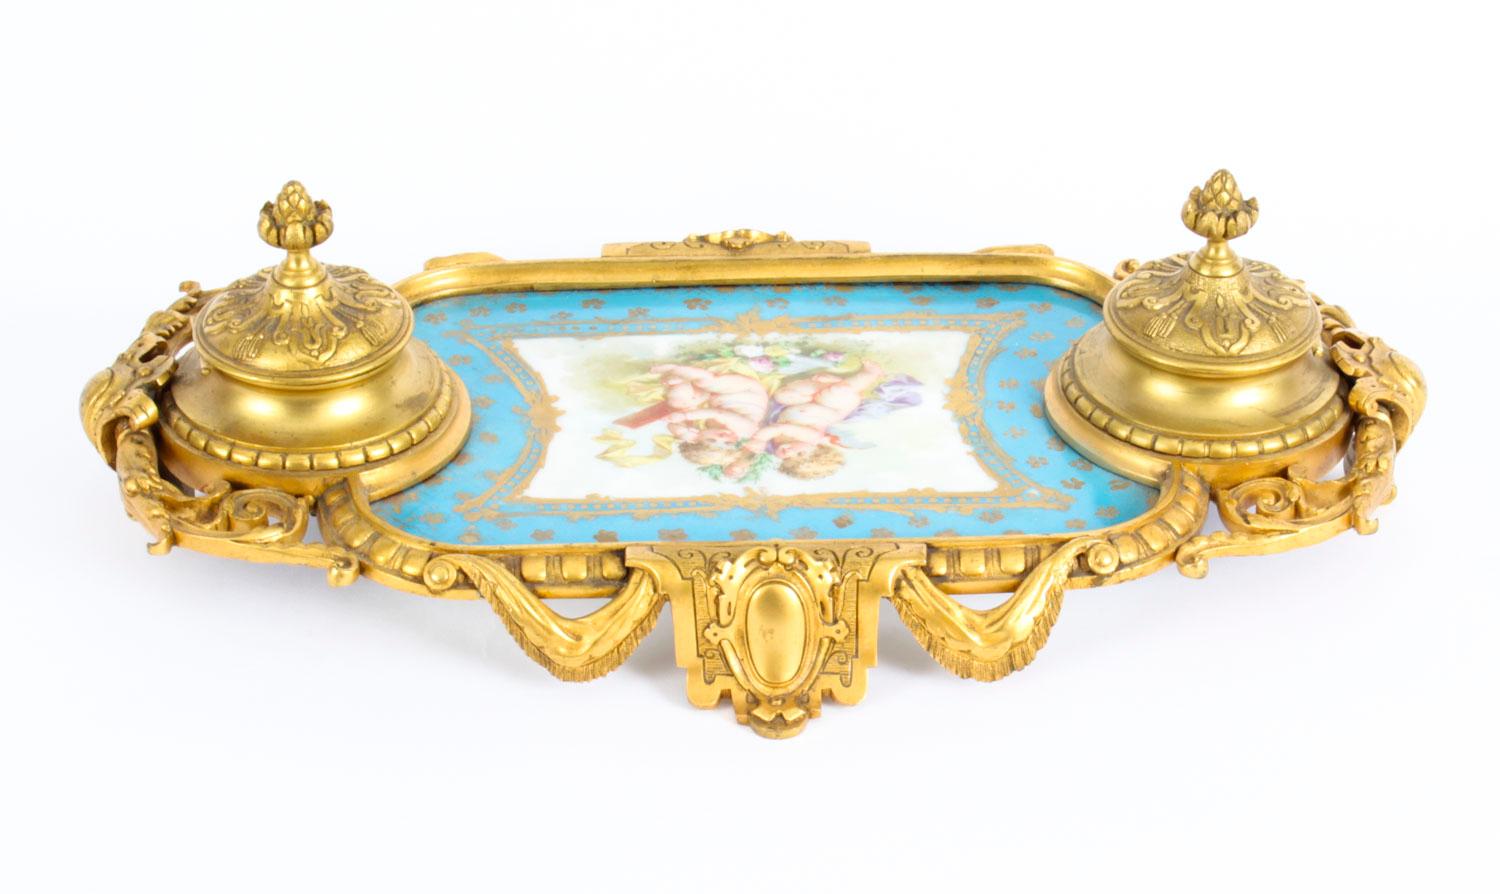 This is a wonderful antique French ormolu inkstand, mounted with Bleu Celeste Sèvres porcelain circa 1870 in date.

Of rectangular form with a pair of raised inkwells with porcelain liners having ormolu covers, and centered with a large hand